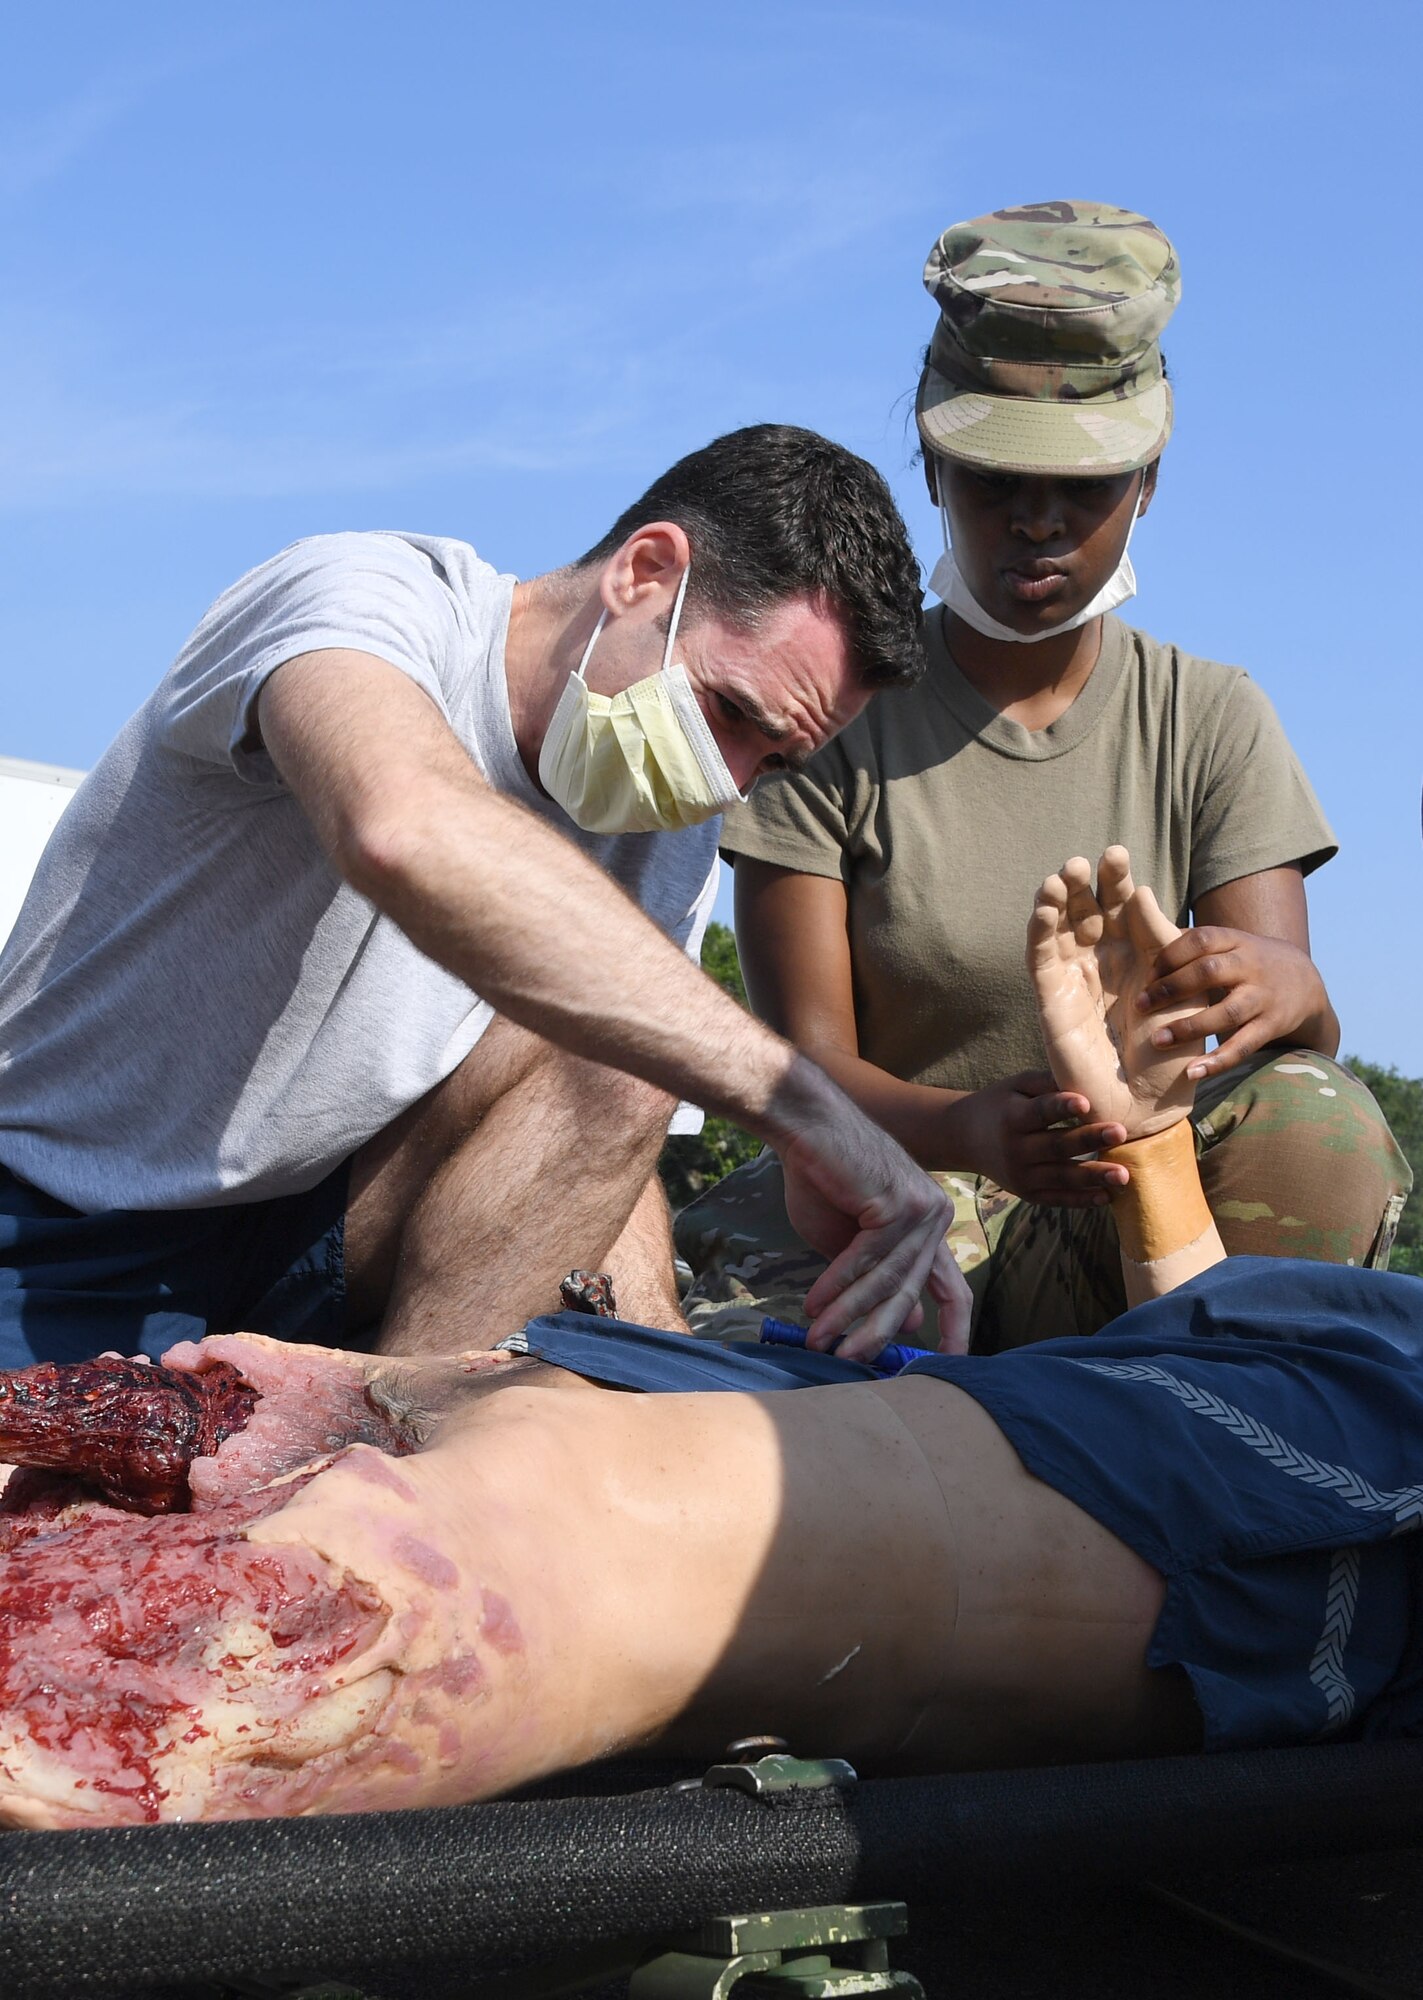 U.S. Air Force Lt. Col. James Renda, 81st Dental Squadron dentist, and Airman 1st Class Heaven Wilborn, 81st Medical Support Squadron medical administrator, applies a tourniquet to a "patient" during a Tactical Combat Casualty Care Rodeo at Keesler Air Force Base, Mississippi, August 5, 2021. The rodeo, a Ready Eagle Training component, provides practical hands-on critical medical trauma skills training for 81st Medical Group personnel. (U.S. Air Force photo by Kemberly Groue)